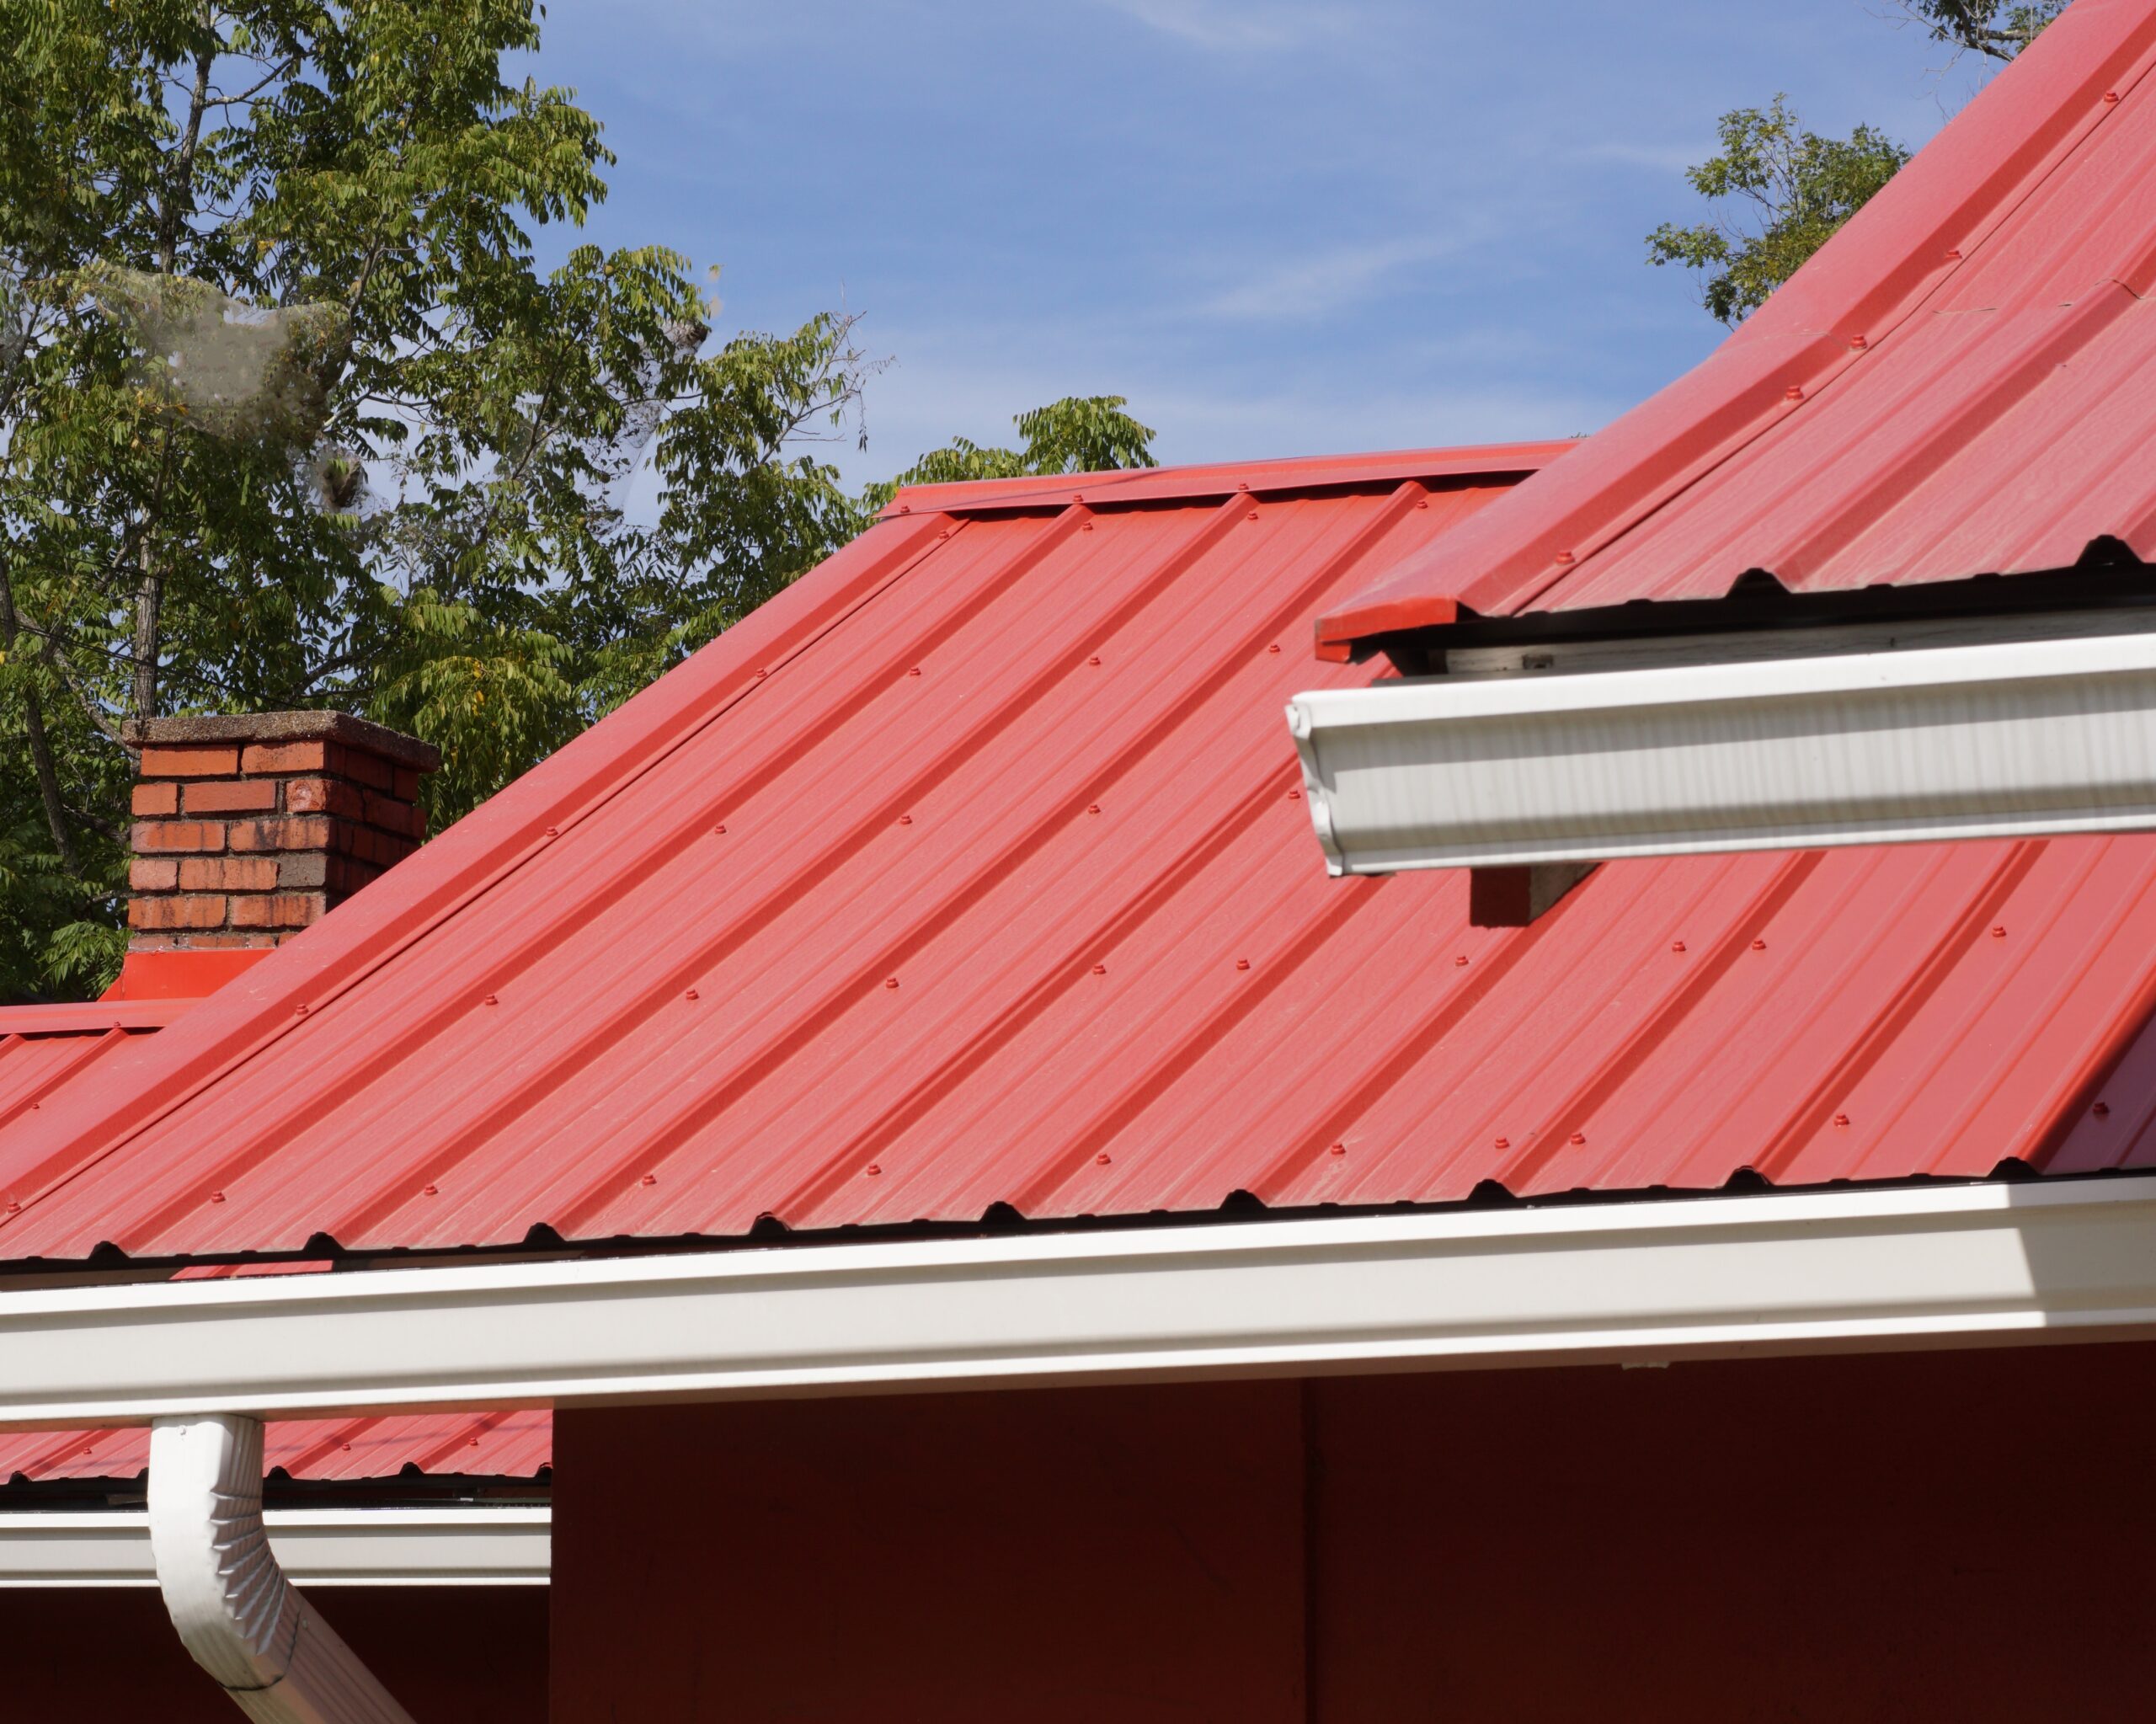 reasons to choose metal roofs, benefits of metal roofing, metal roofing advantages, Greenville